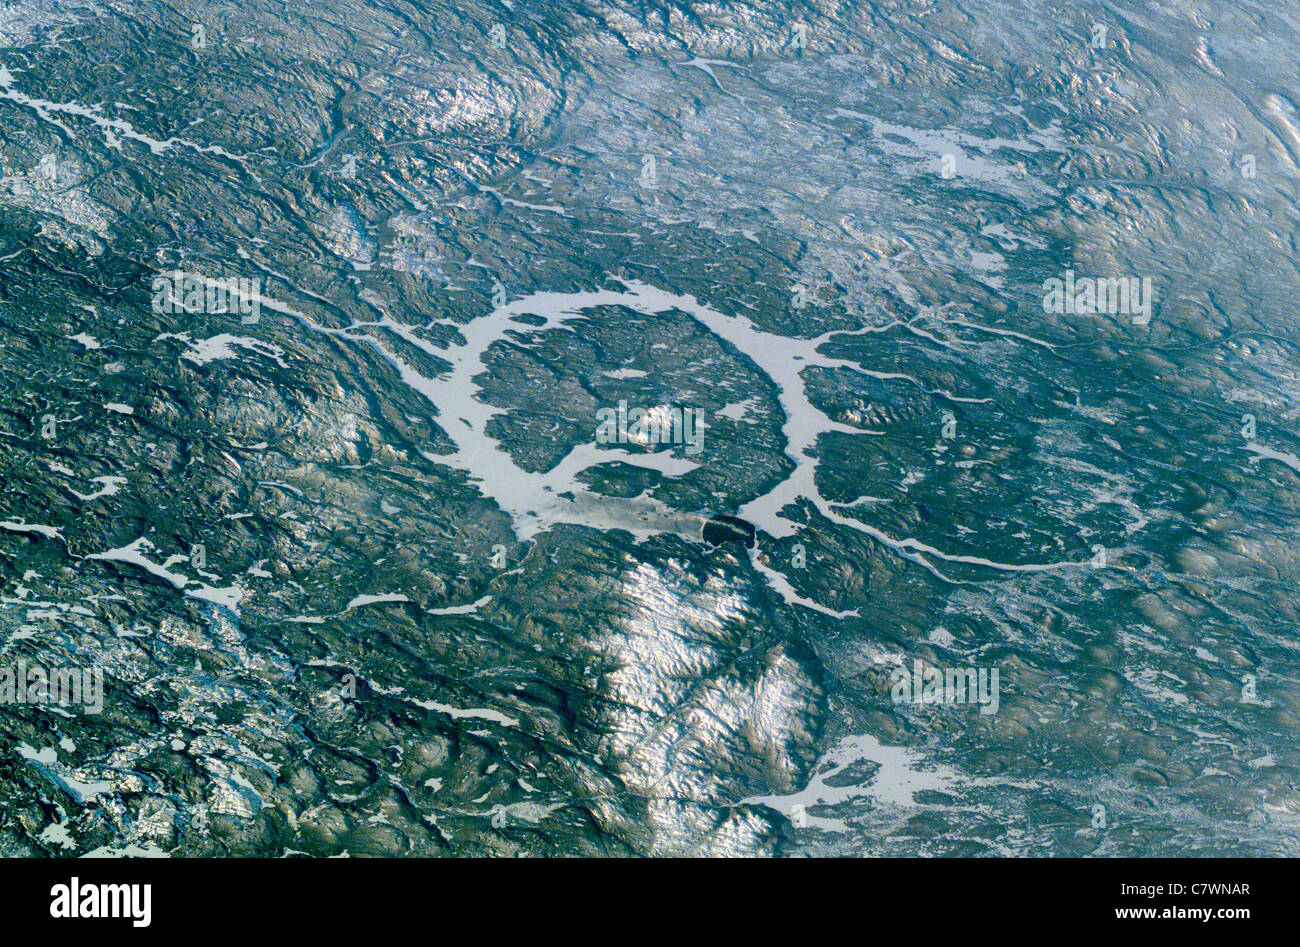 Manicouagan Reservoir, also called Lake Manicouagan is an annular lake in central Quebec, Canada. Stock Photo